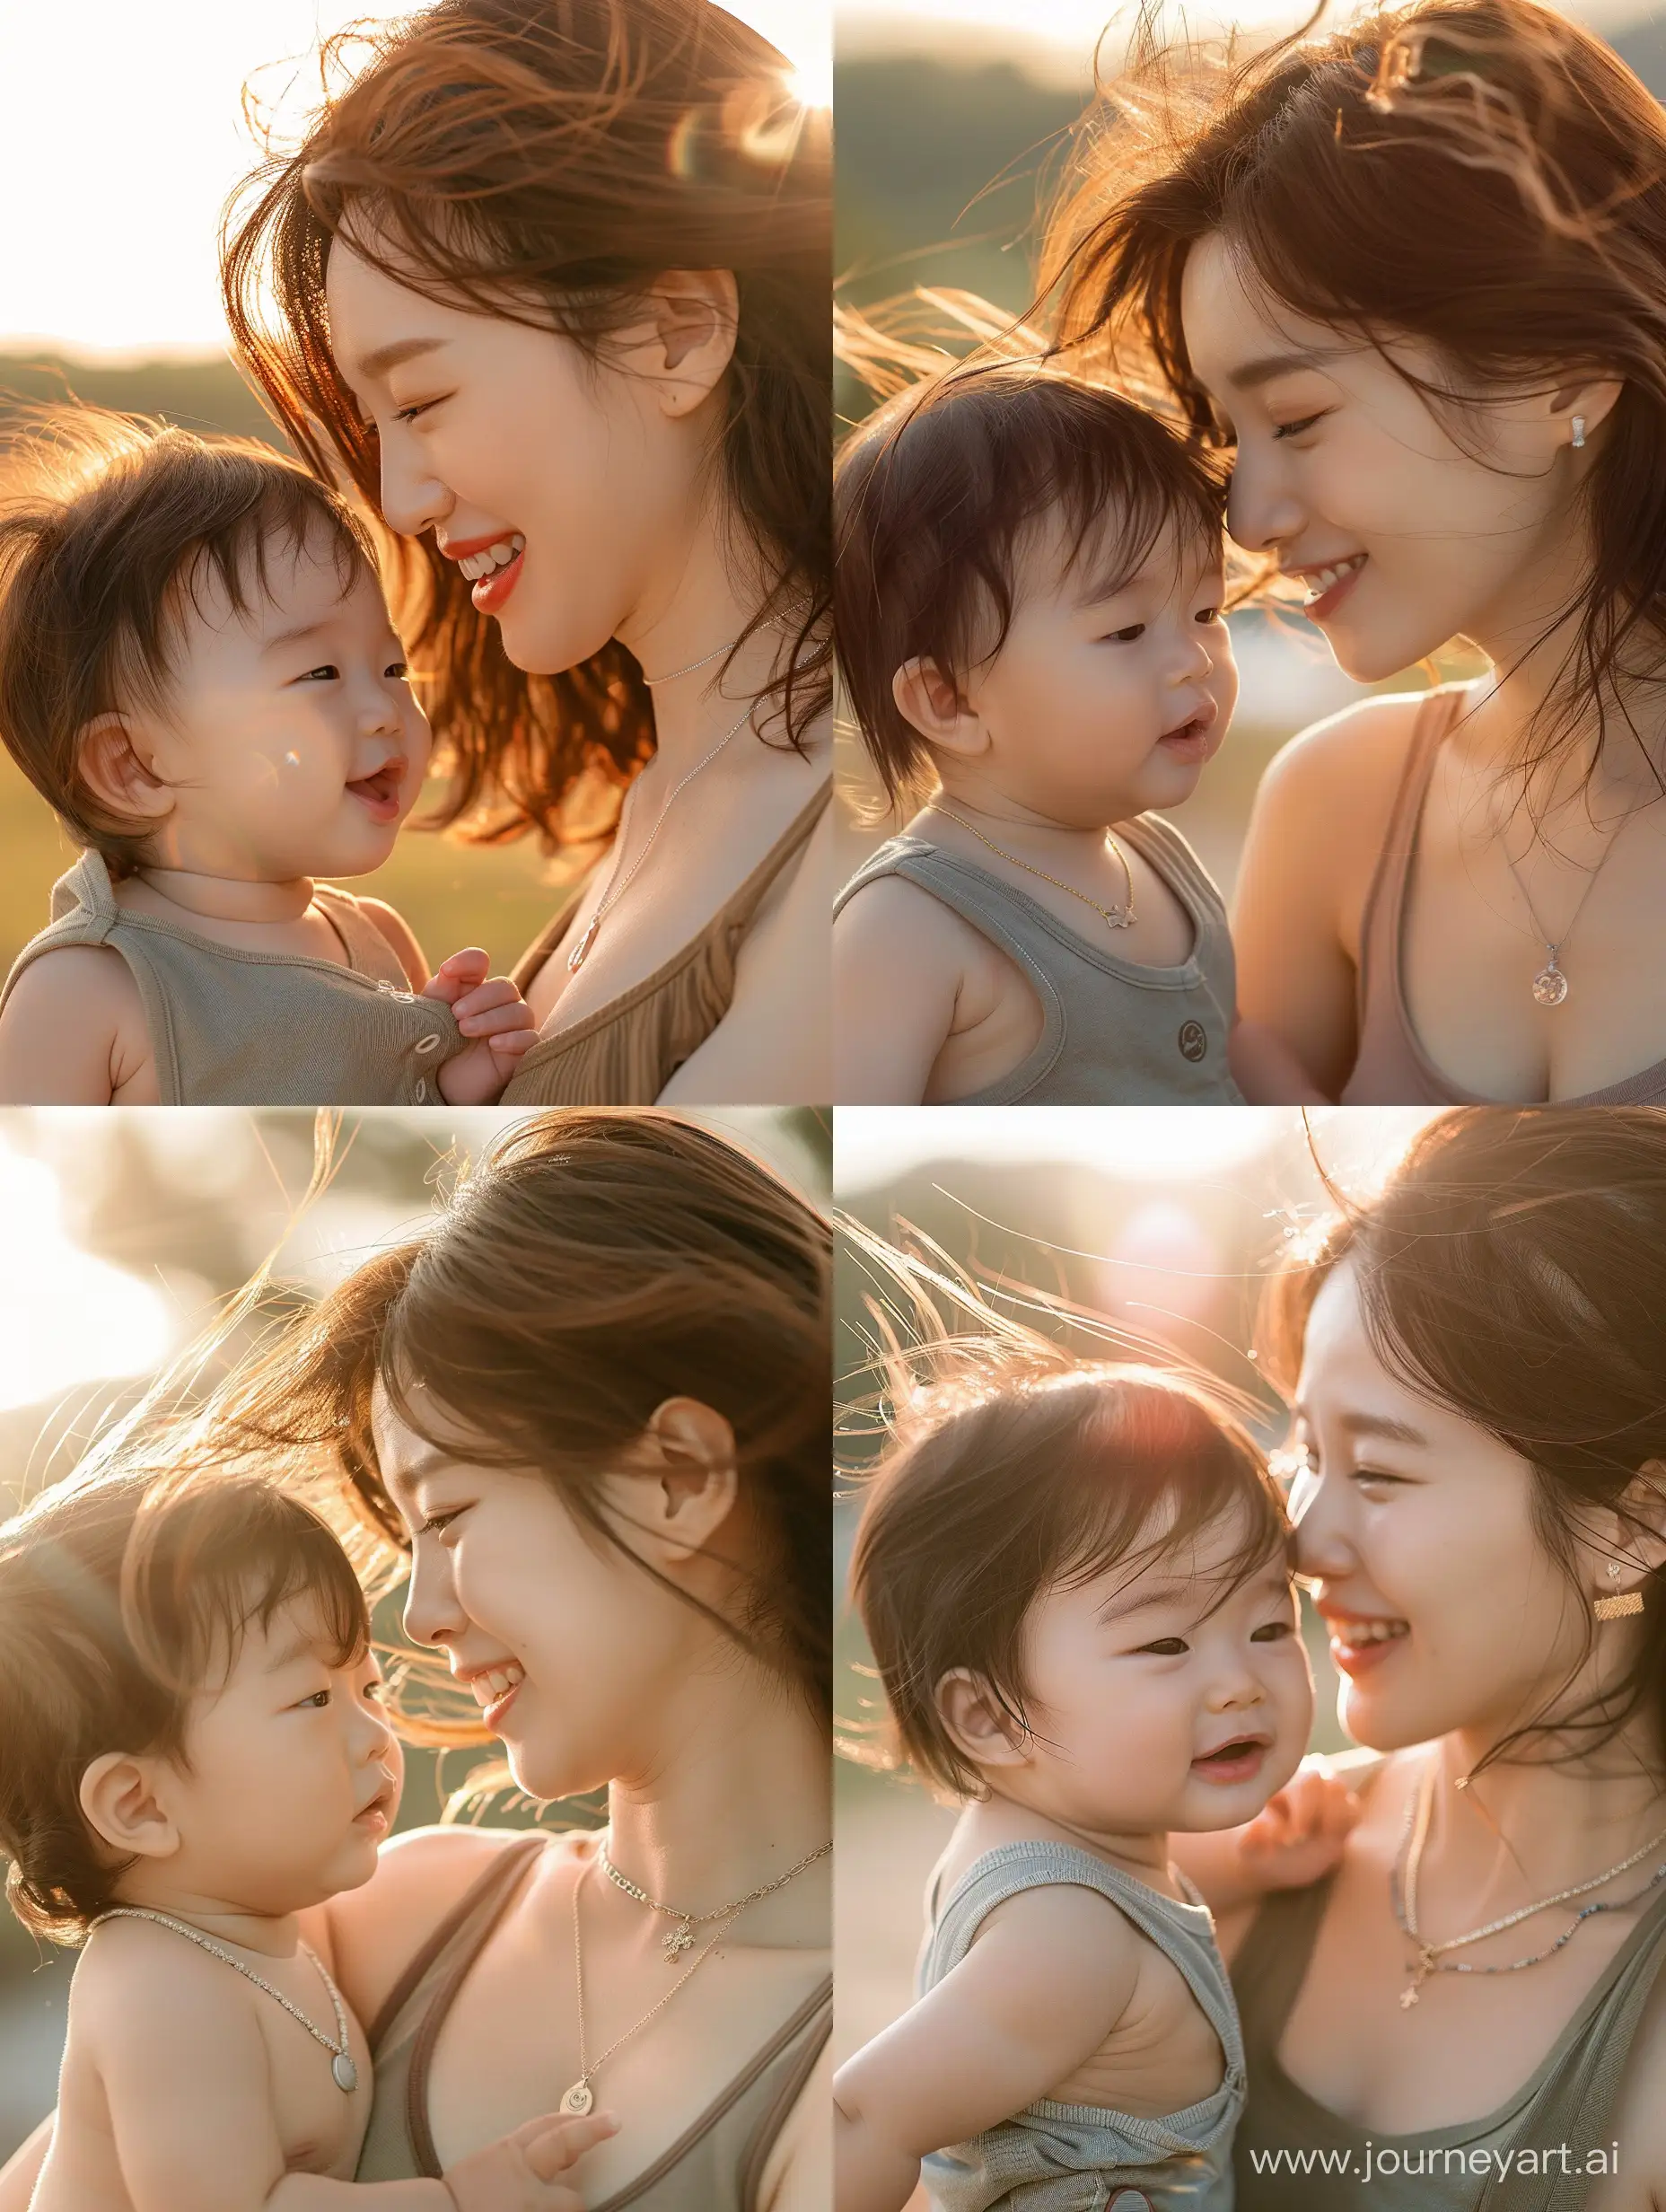 professional photo of Side view of baby with forehead close to beautiful Korean female, brown hair, tank top necklace, both smile, hair blowing in the wind, sun ray is background